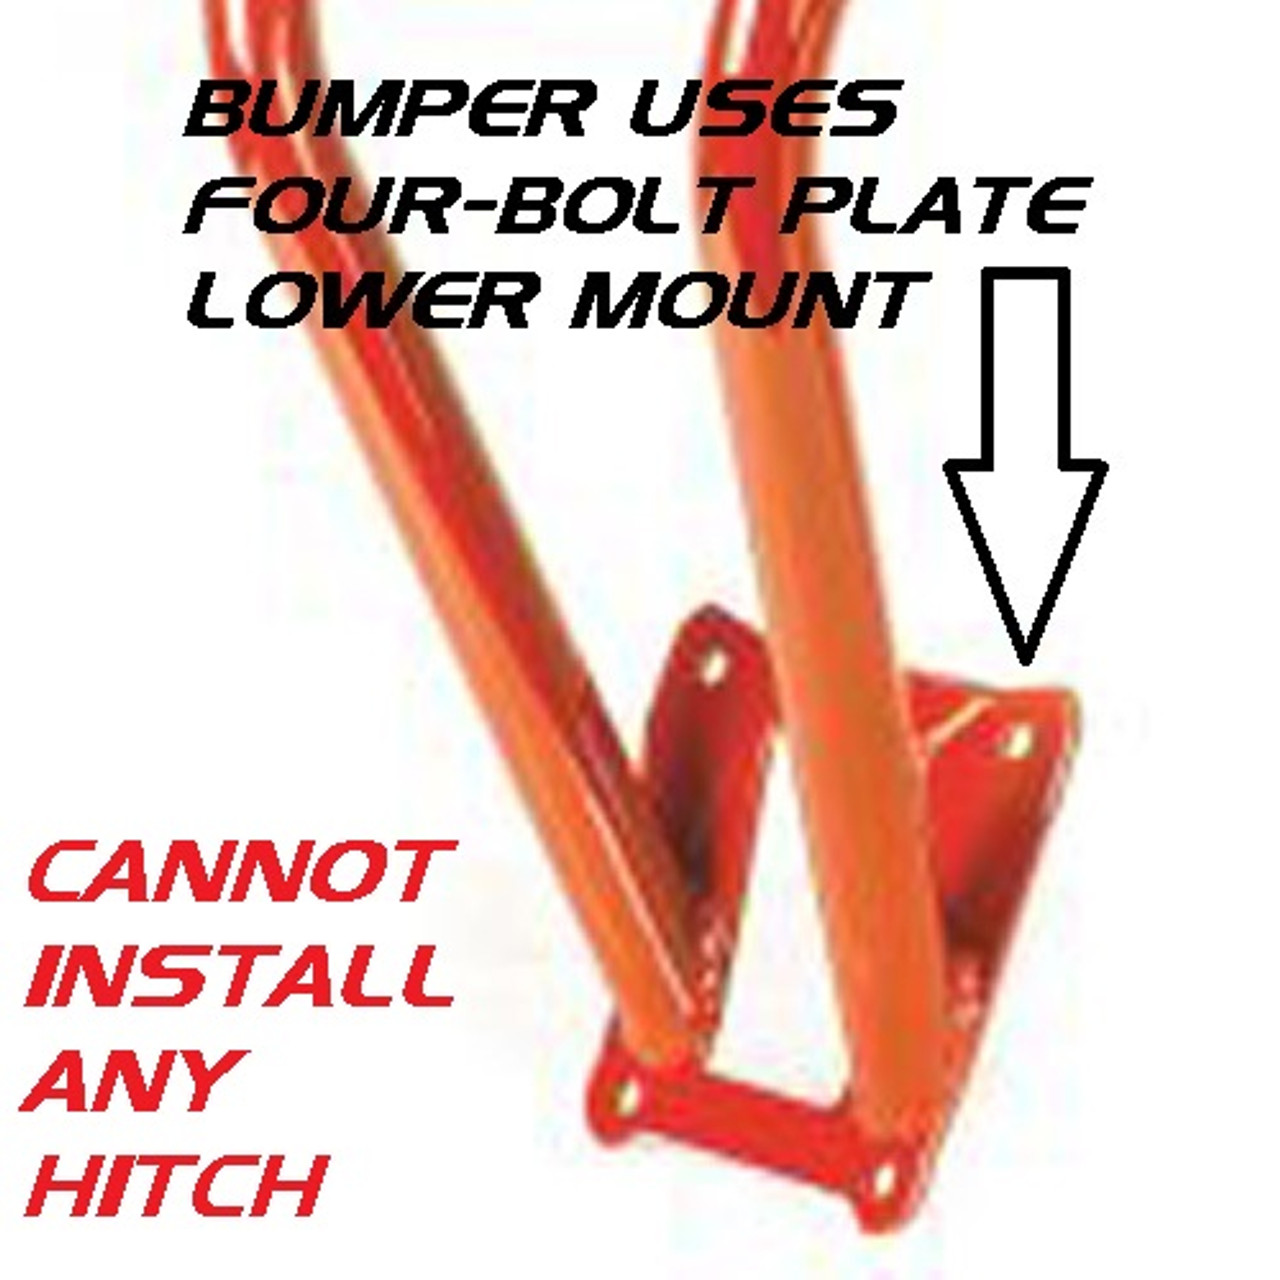 Four-Bolt Plate Lower Bumper Mount - No hitch will fit